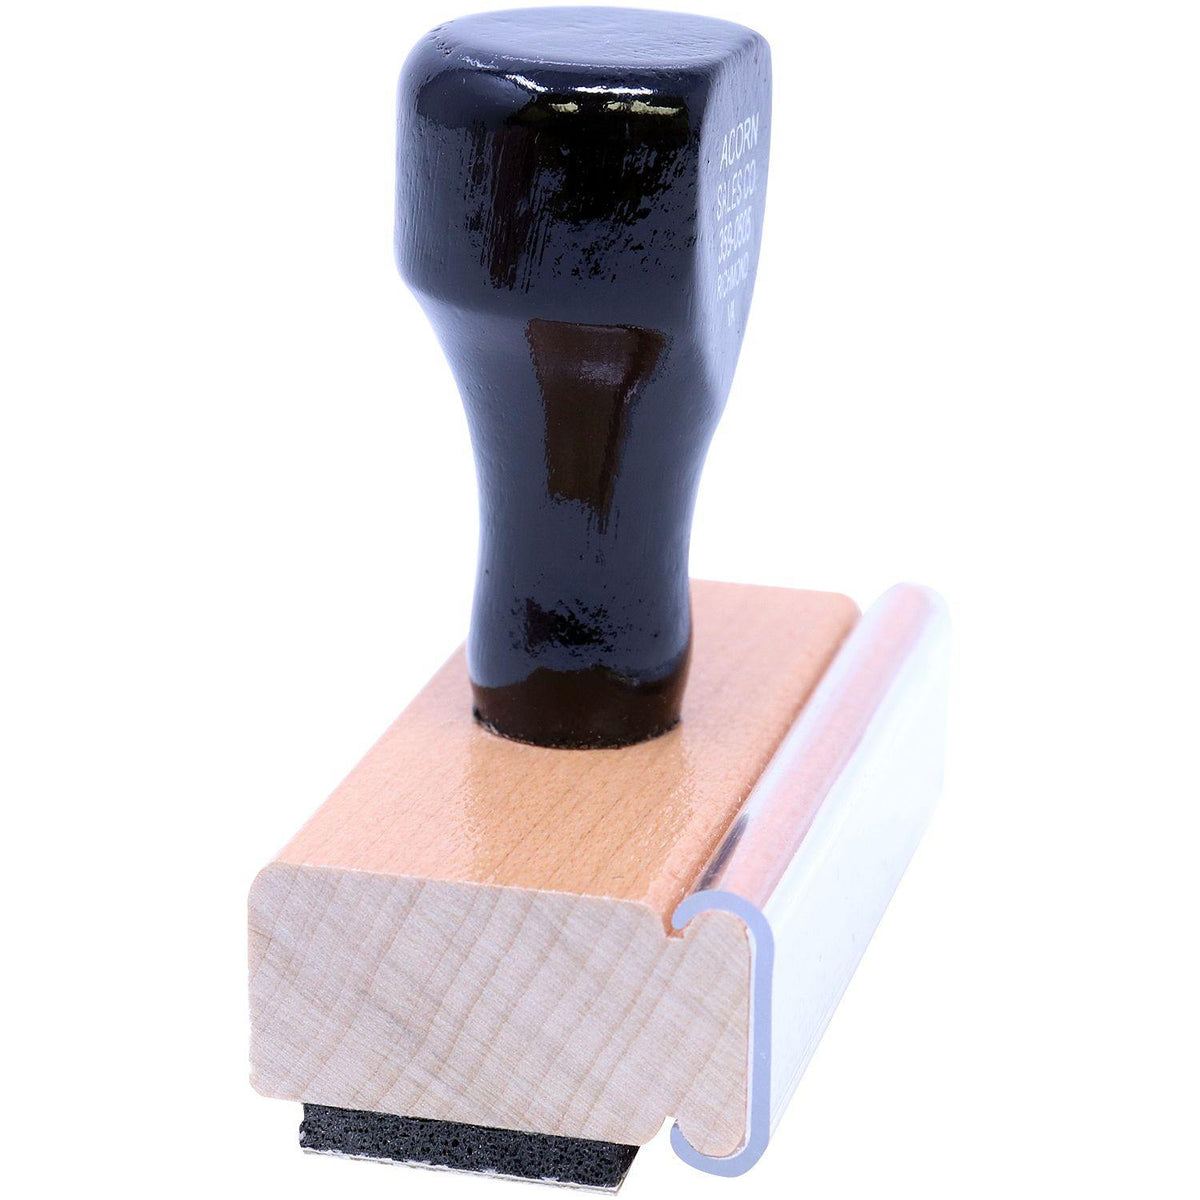 Side View of You Insurance has Paid their portion Rubber Stamp at an Angle